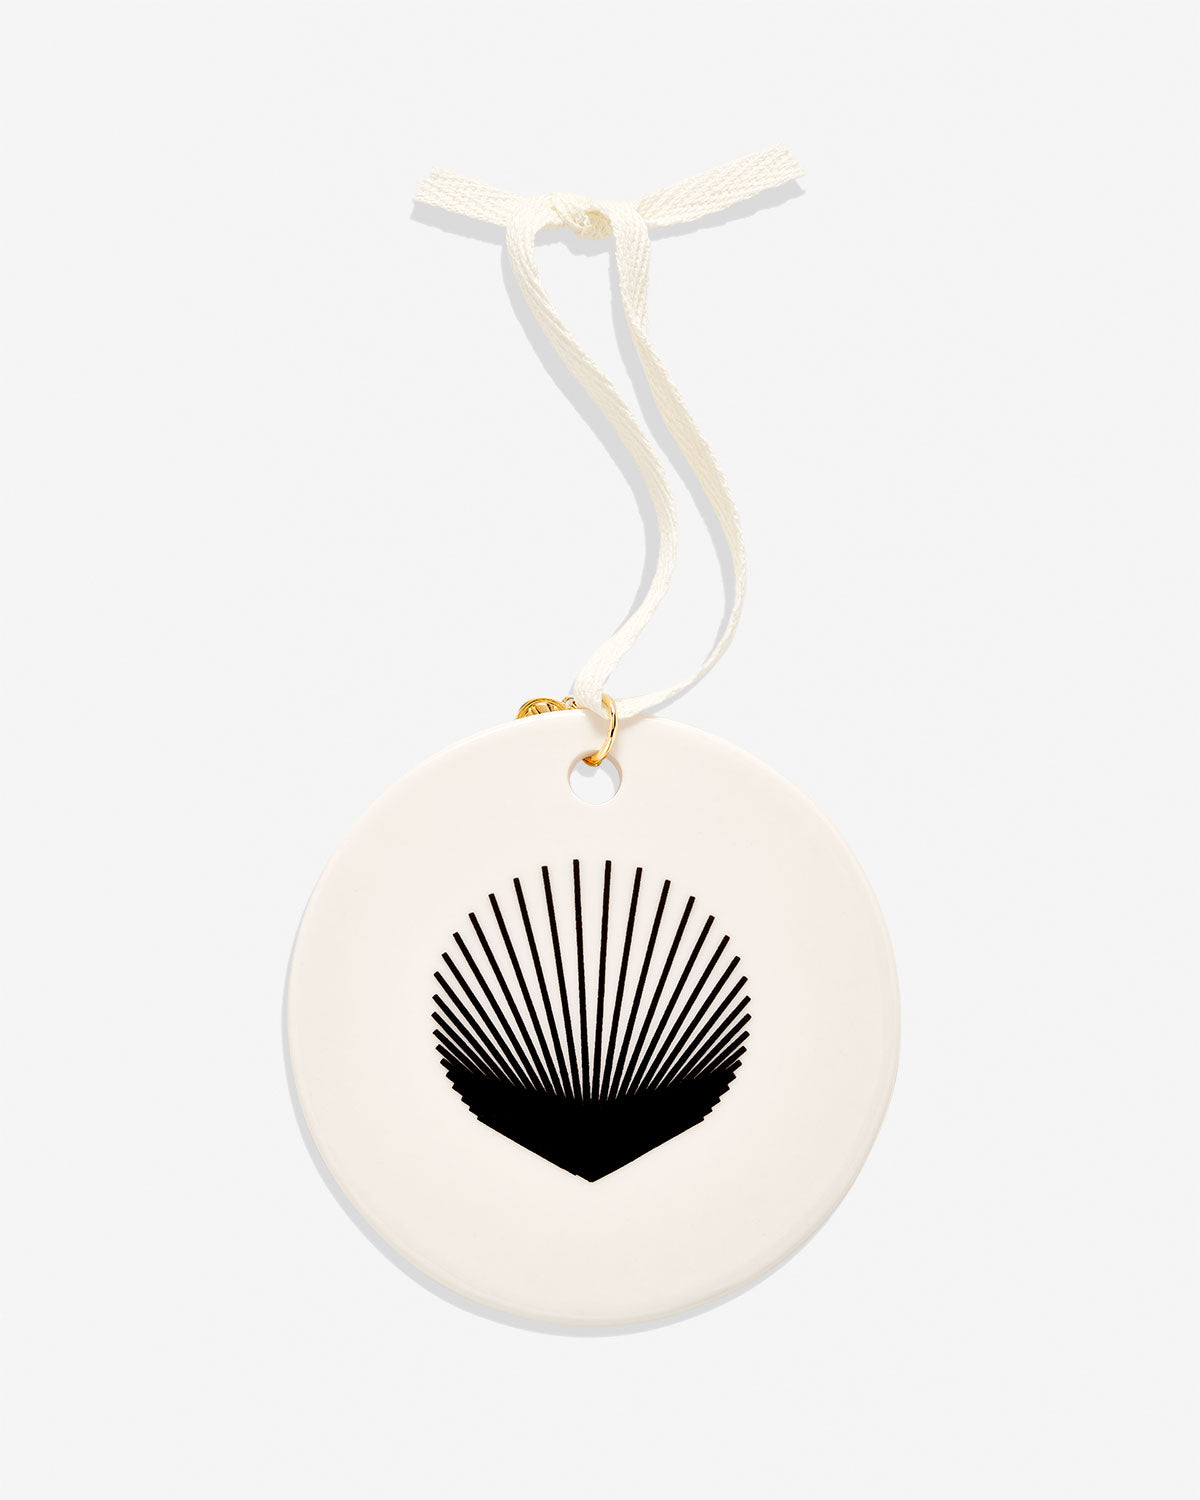 Bryan Anthonys Grit White Ceramic Holiday Ornament in Black